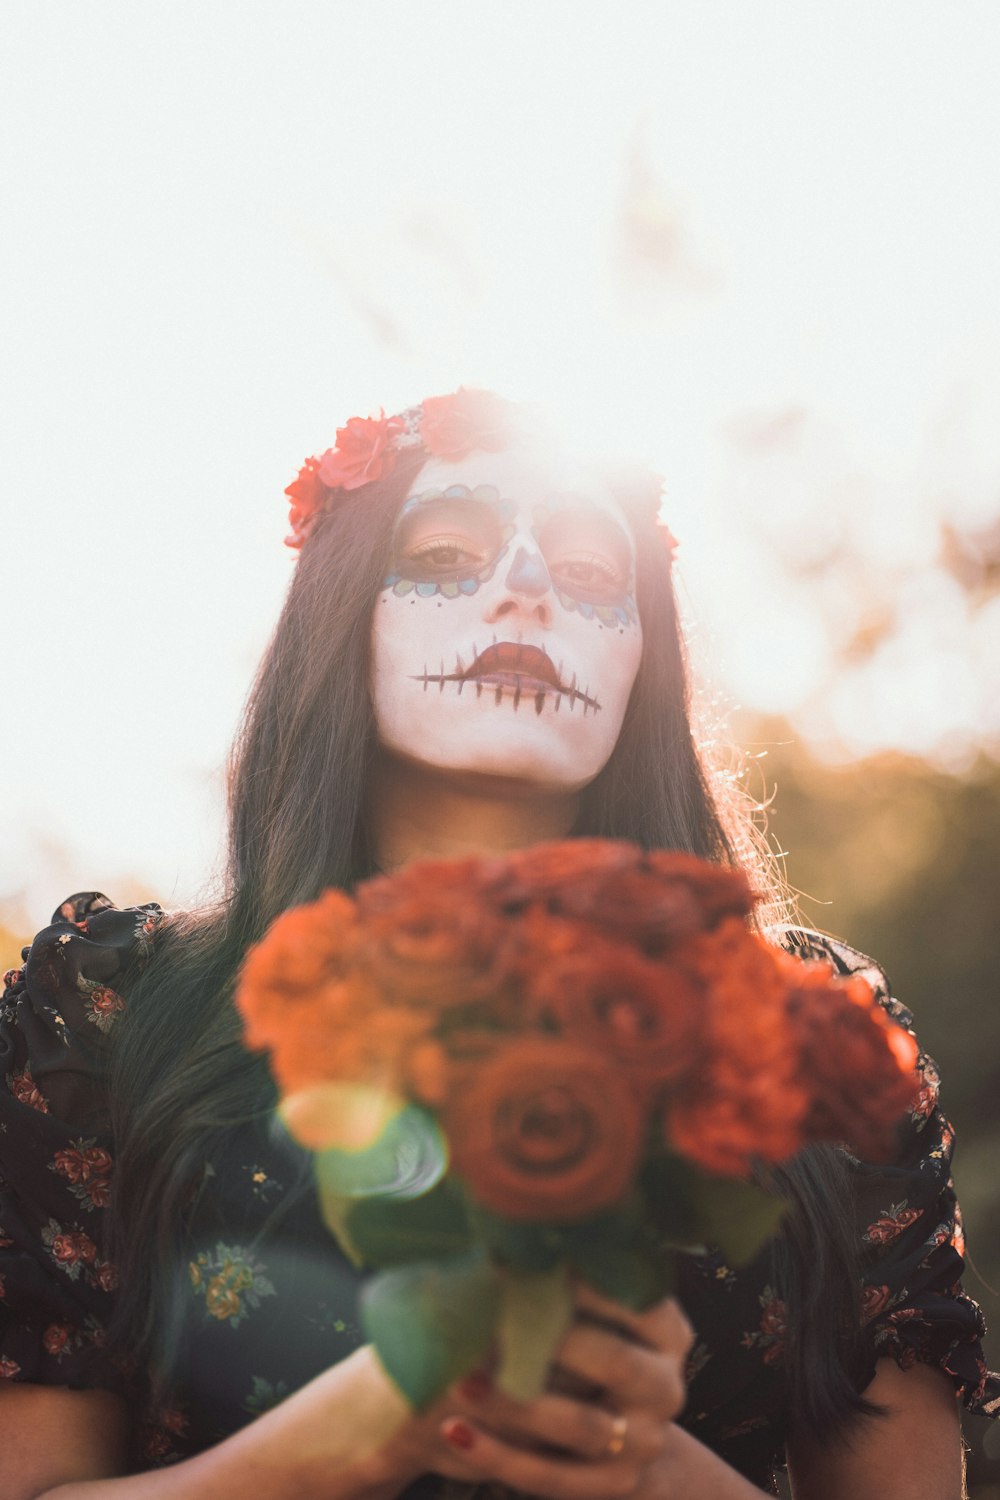 woman with skull makeup